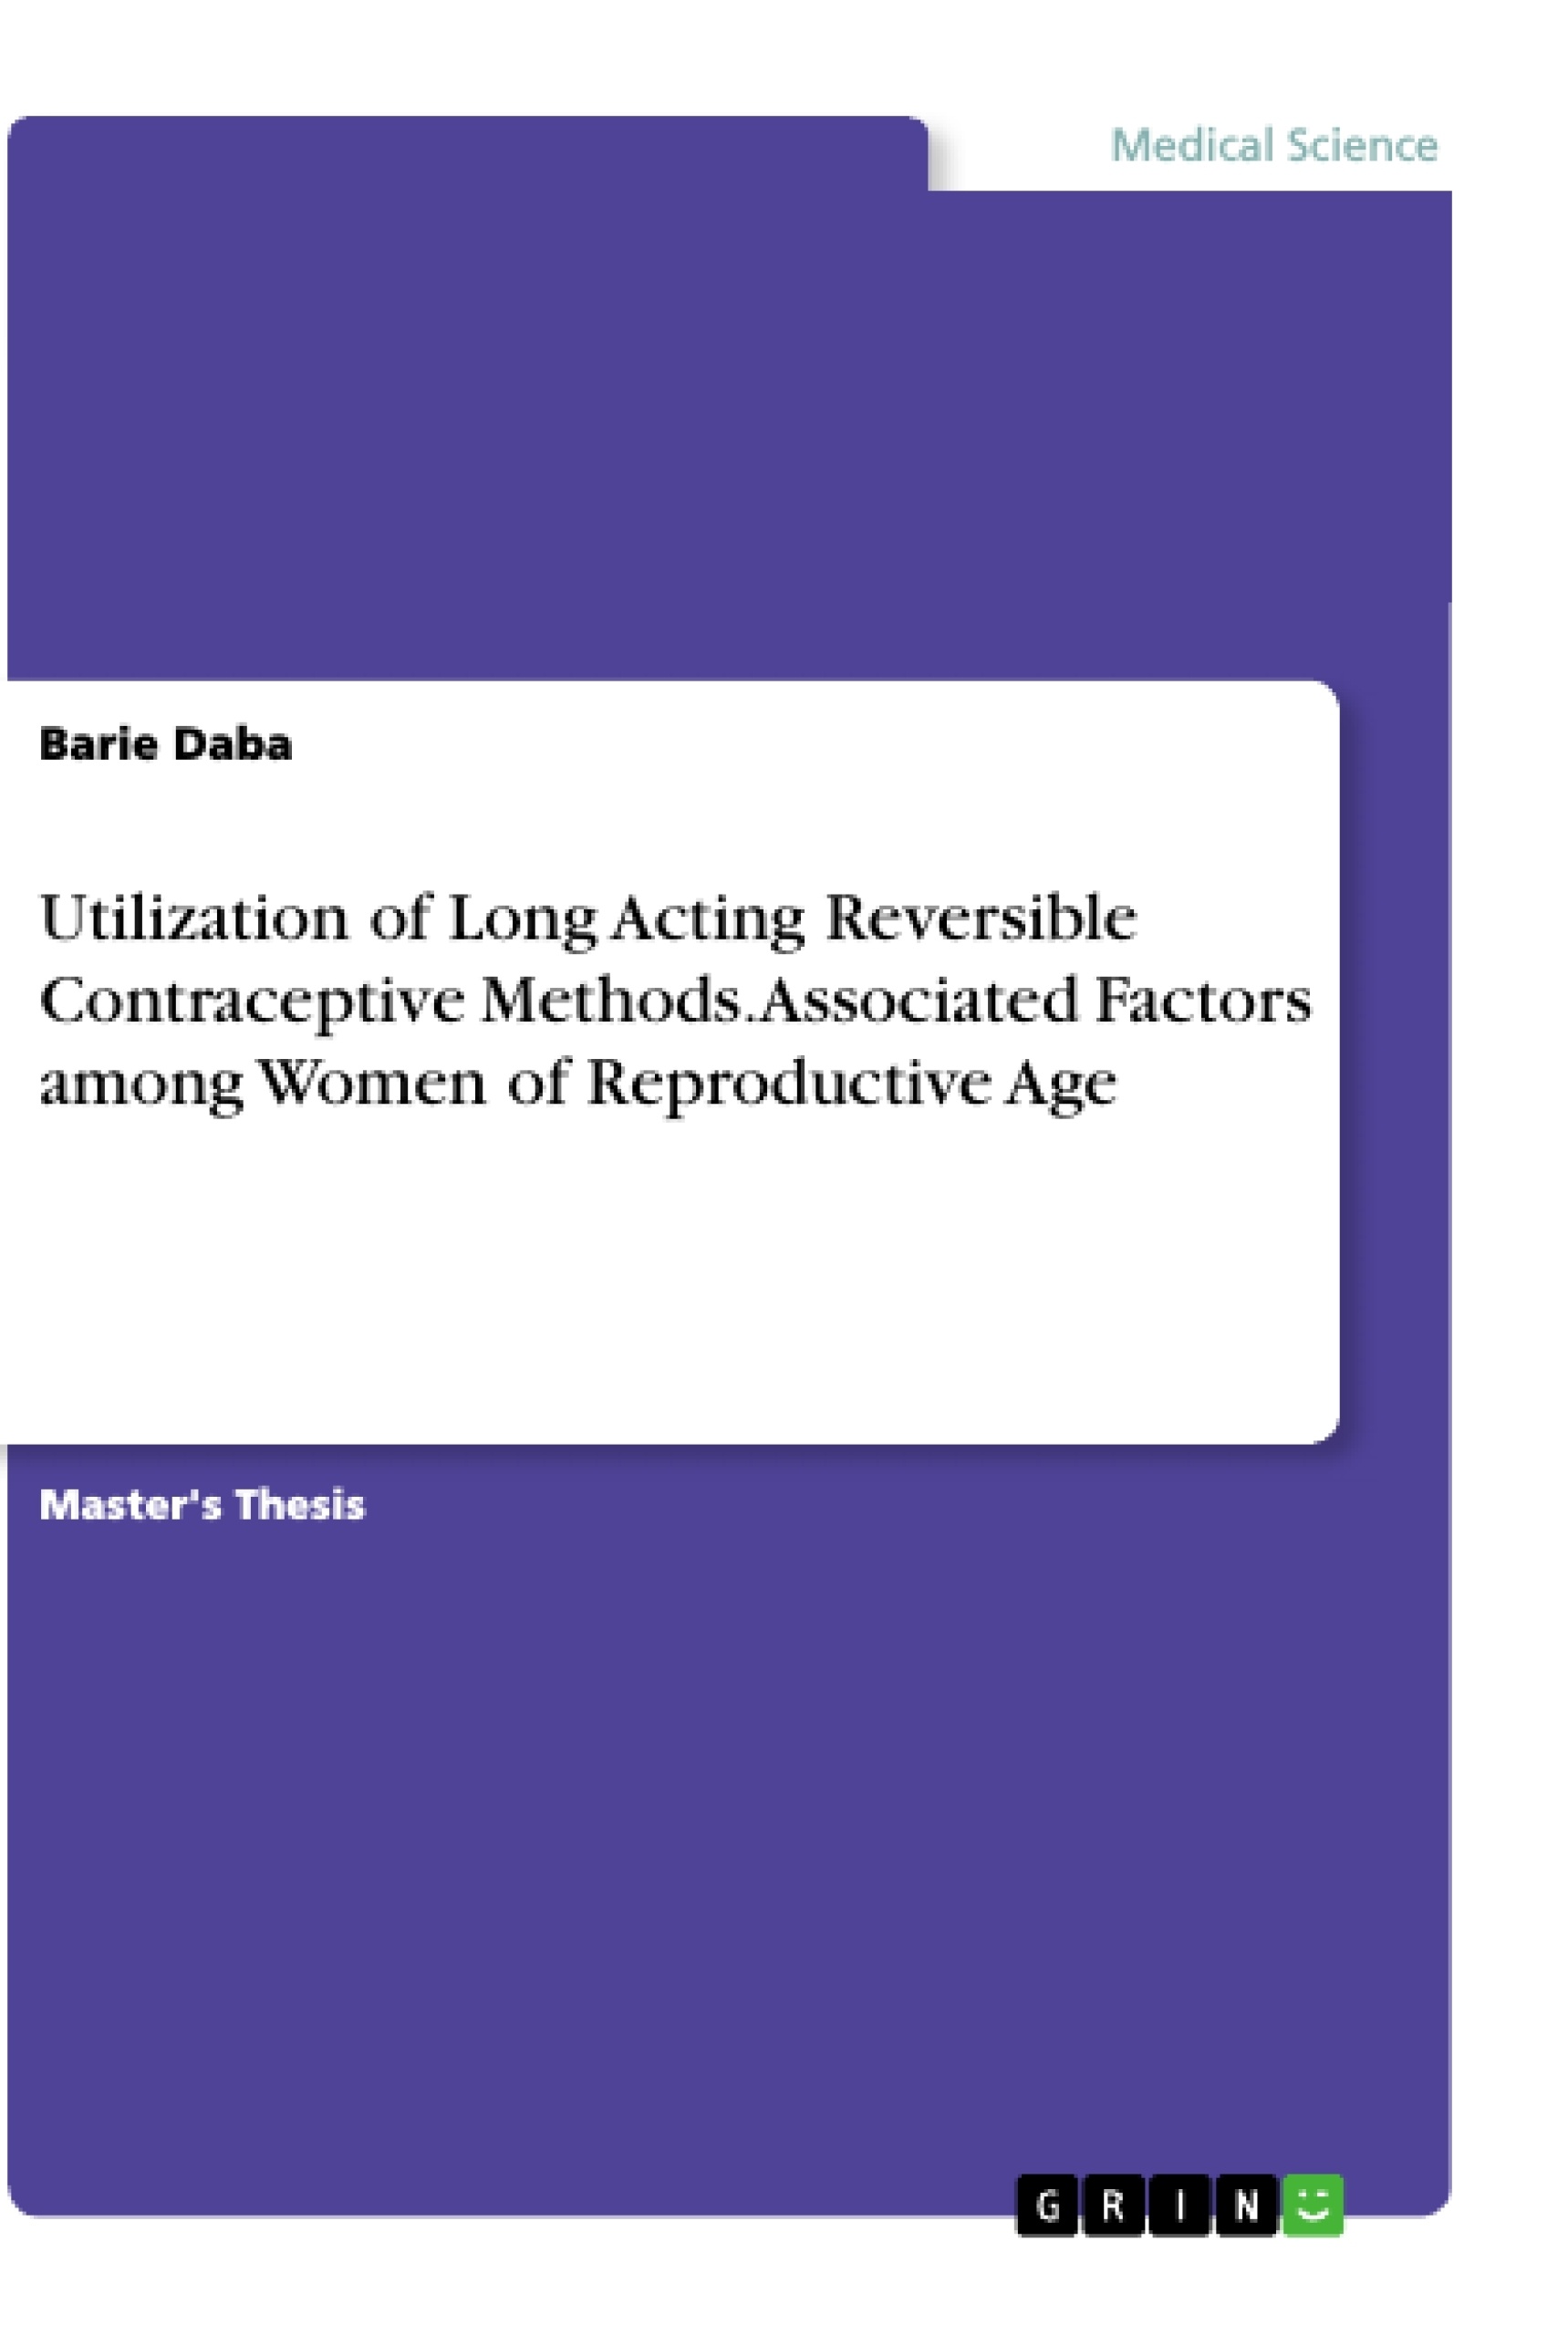 Título: Utilization of Long Acting Reversible Contraceptive Methods. Associated Factors among Women of Reproductive Age